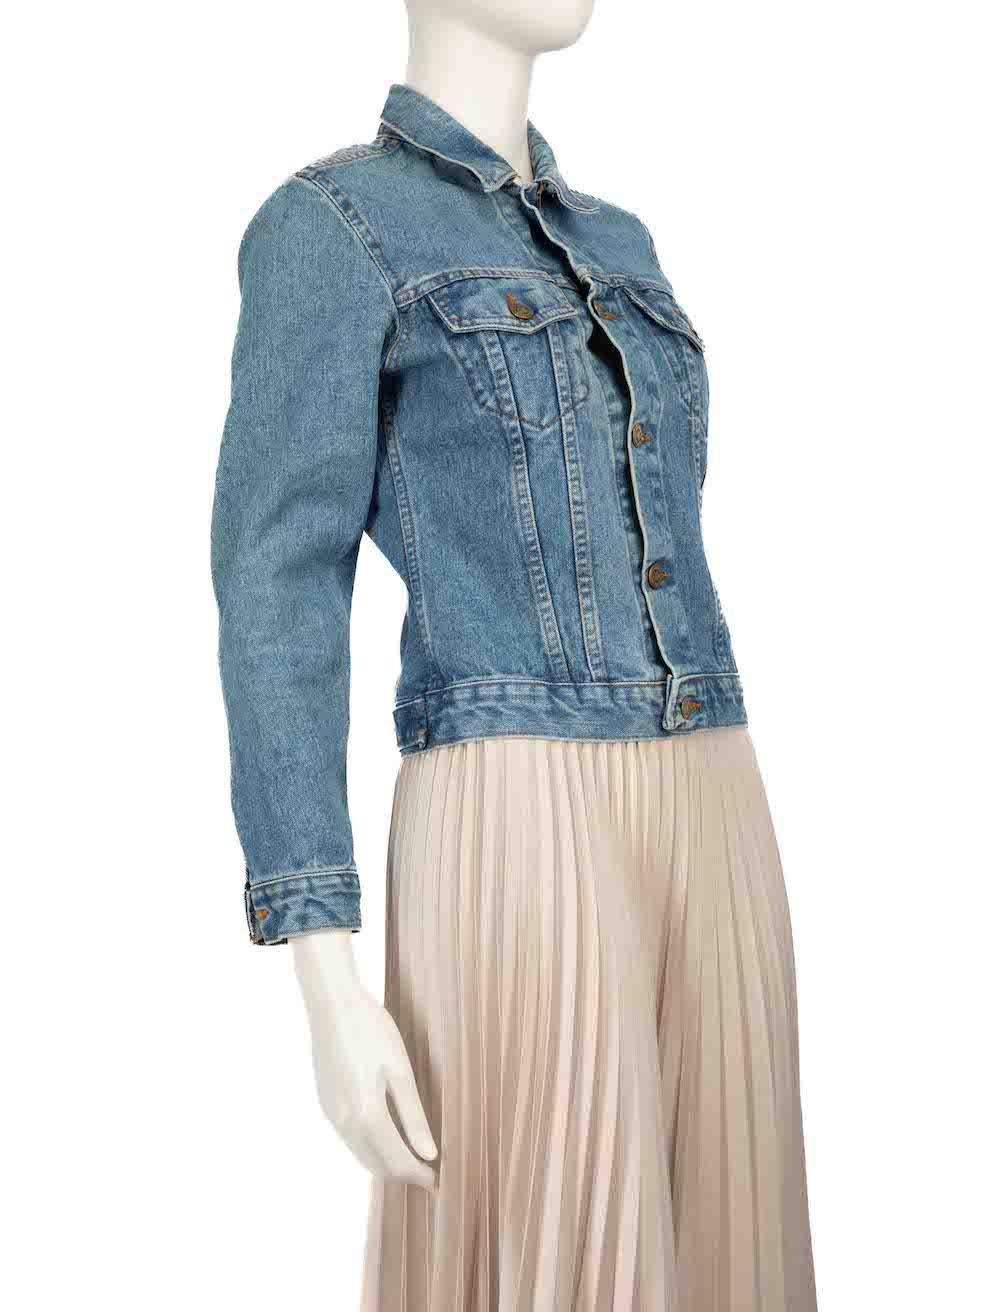 CONDITION is Very good. Minimal wear to the jacket is evident. Minimal wear to the collar is seen with discolouration marks and pulls to the weave at the end of the collar on this used Moschino Cheap And Chic designer resale item.
 
 
 
 Details
 
